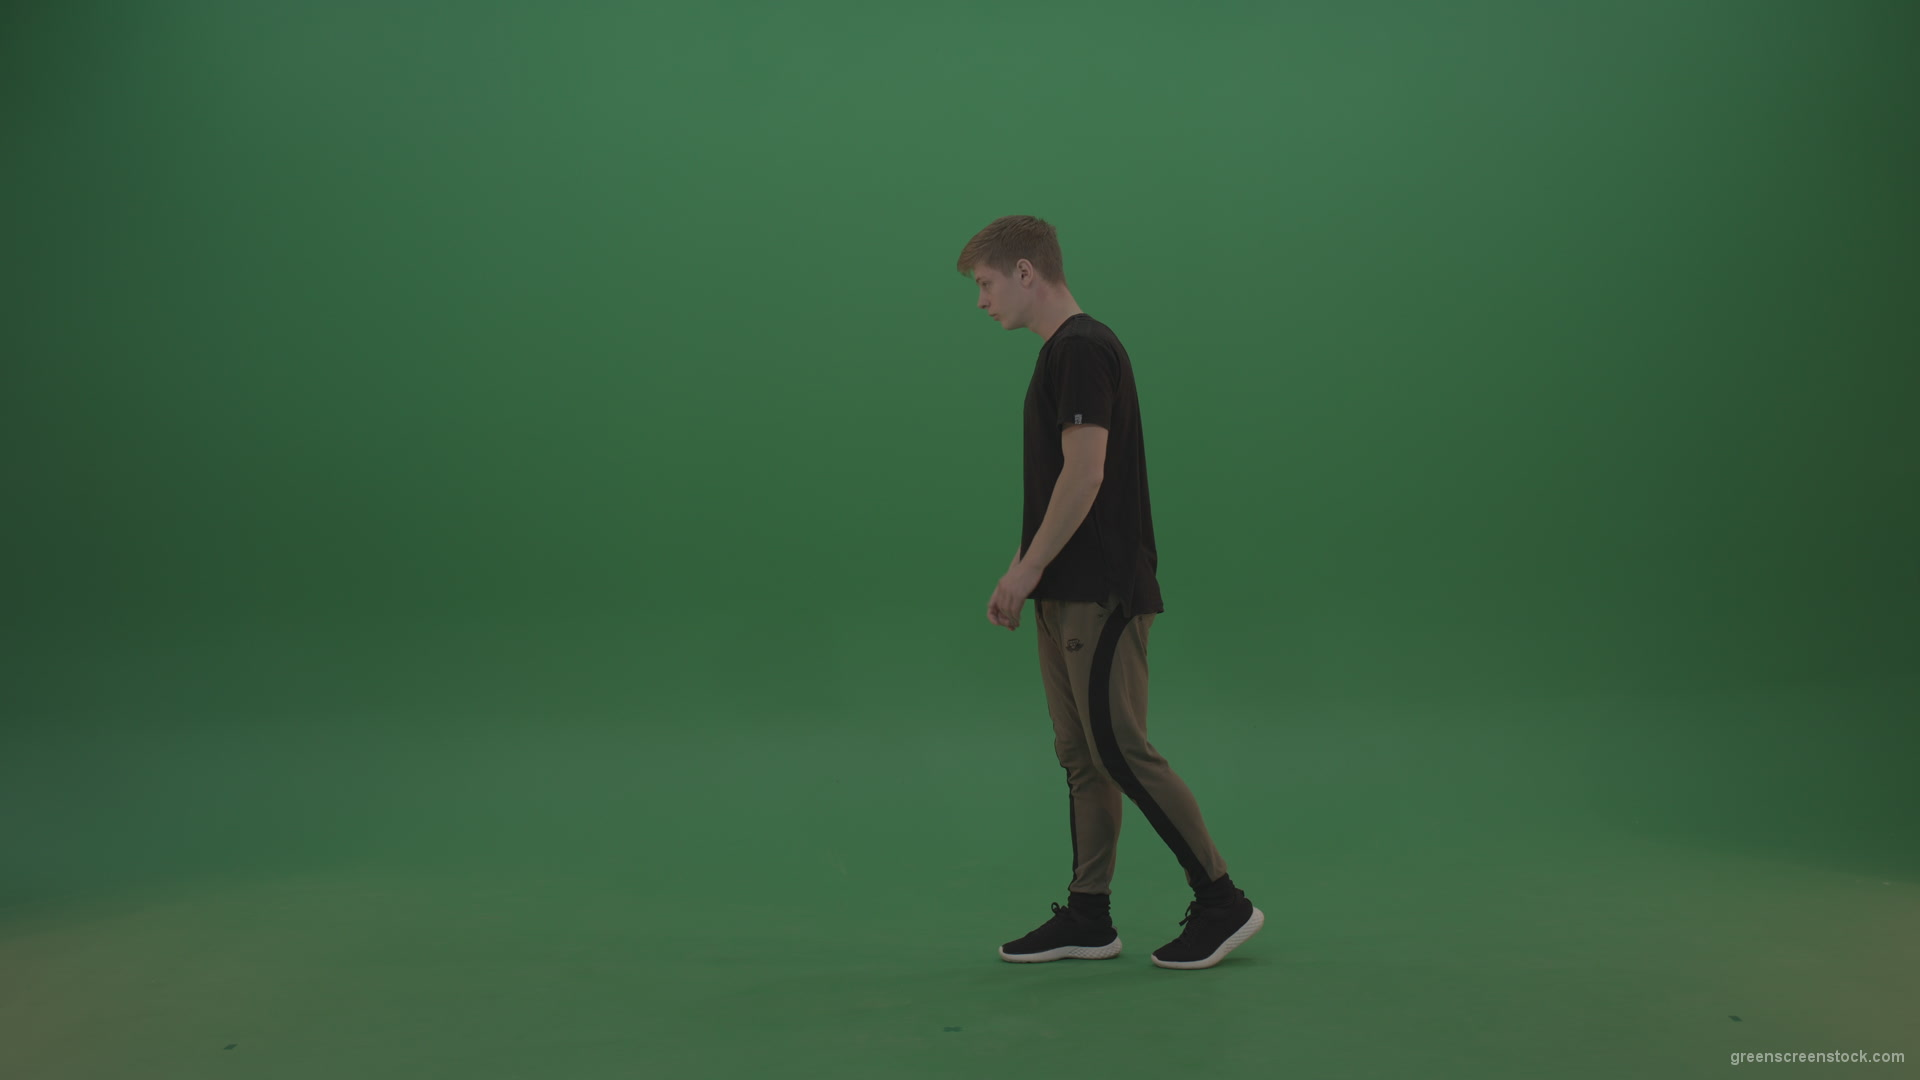 Young_Red_Hair_Sportsman_Doing_Ideal_Webster_Freerun_Parkour_Trick_Move_On_Green_Screen_Wall_Background_002 Green Screen Stock